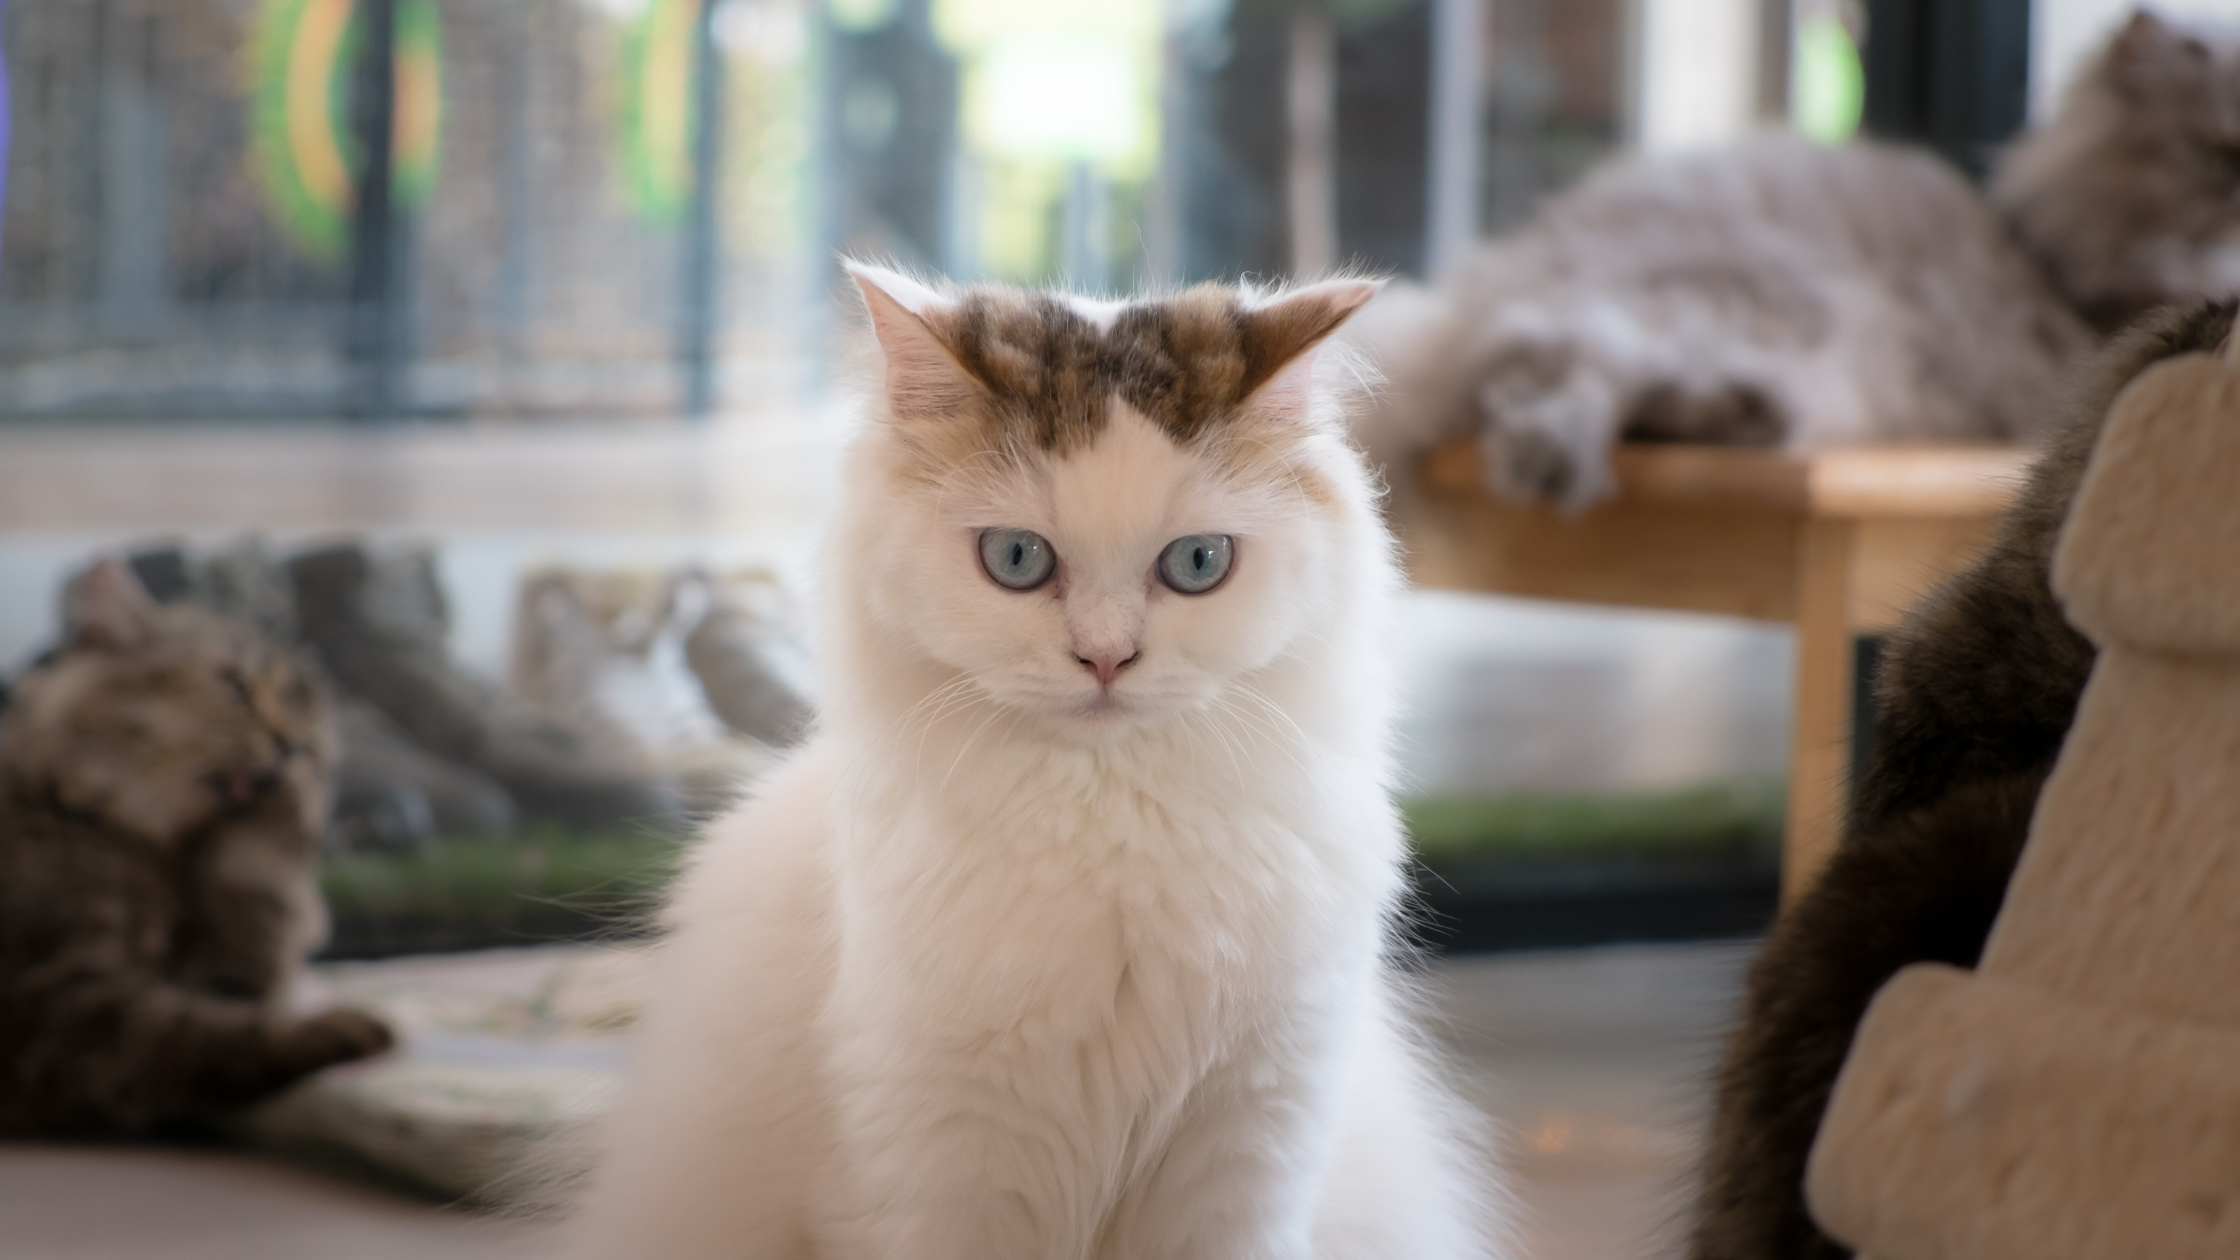 First, Let's Identify Common Behavioral Problems in Cats